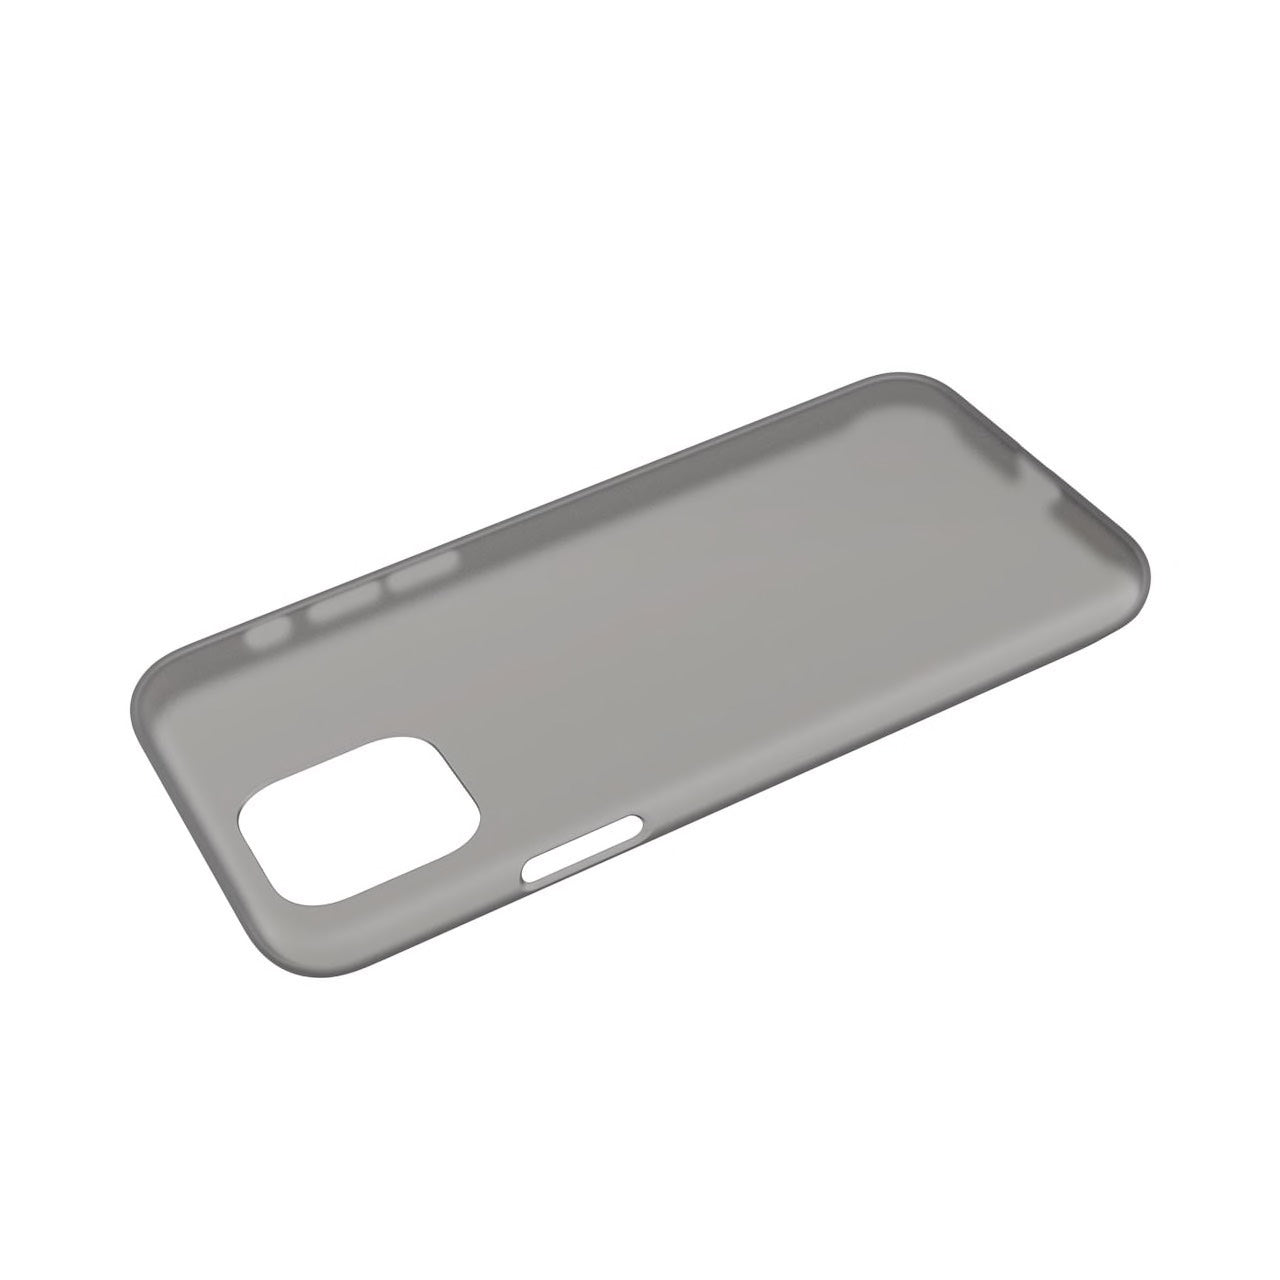 Air Jacket for iPhone 11 Pro - Smoke Matte